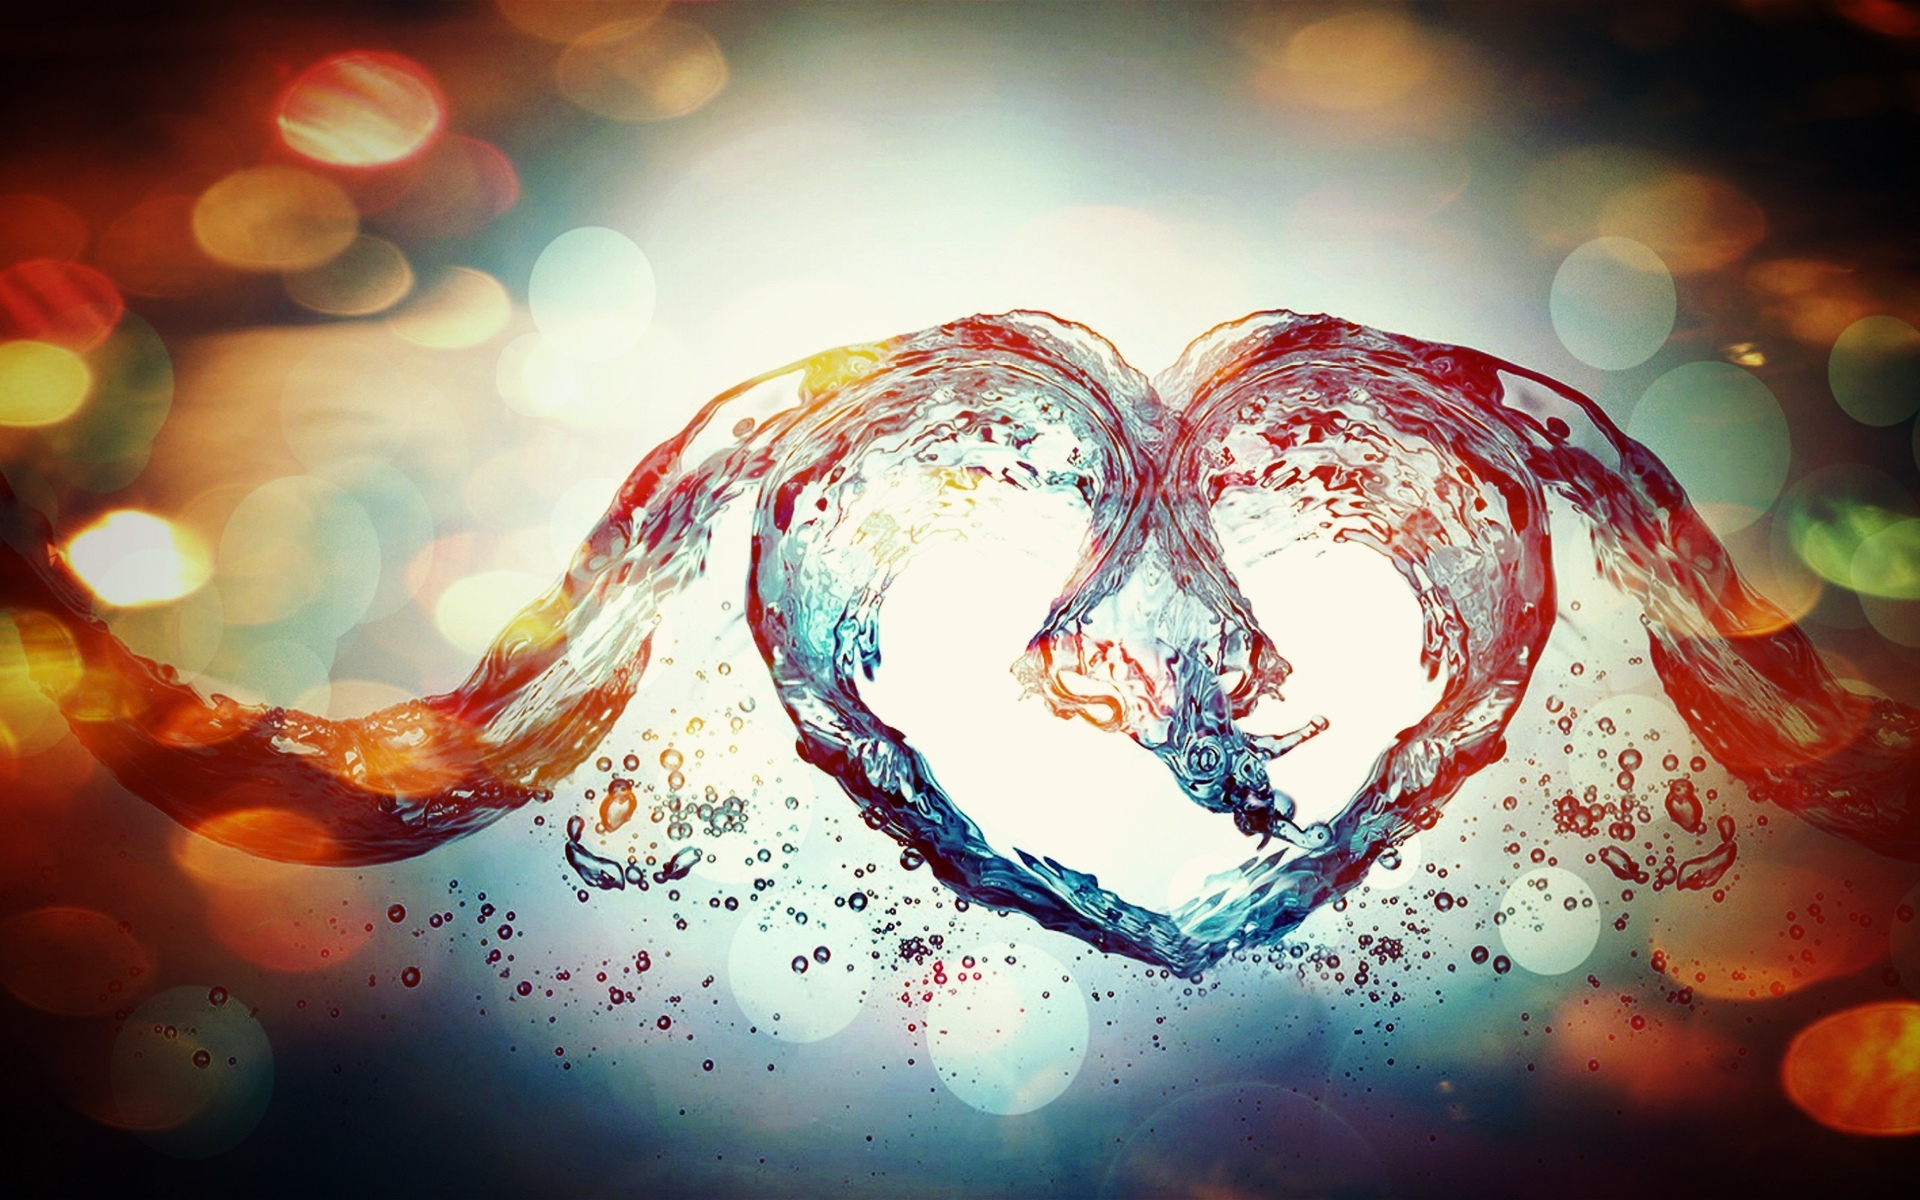 abstract, Water, Heart, Sparkle, Bubbles, Waves, Liquidvalentines, Holidays, Love, Romance Wallpaper